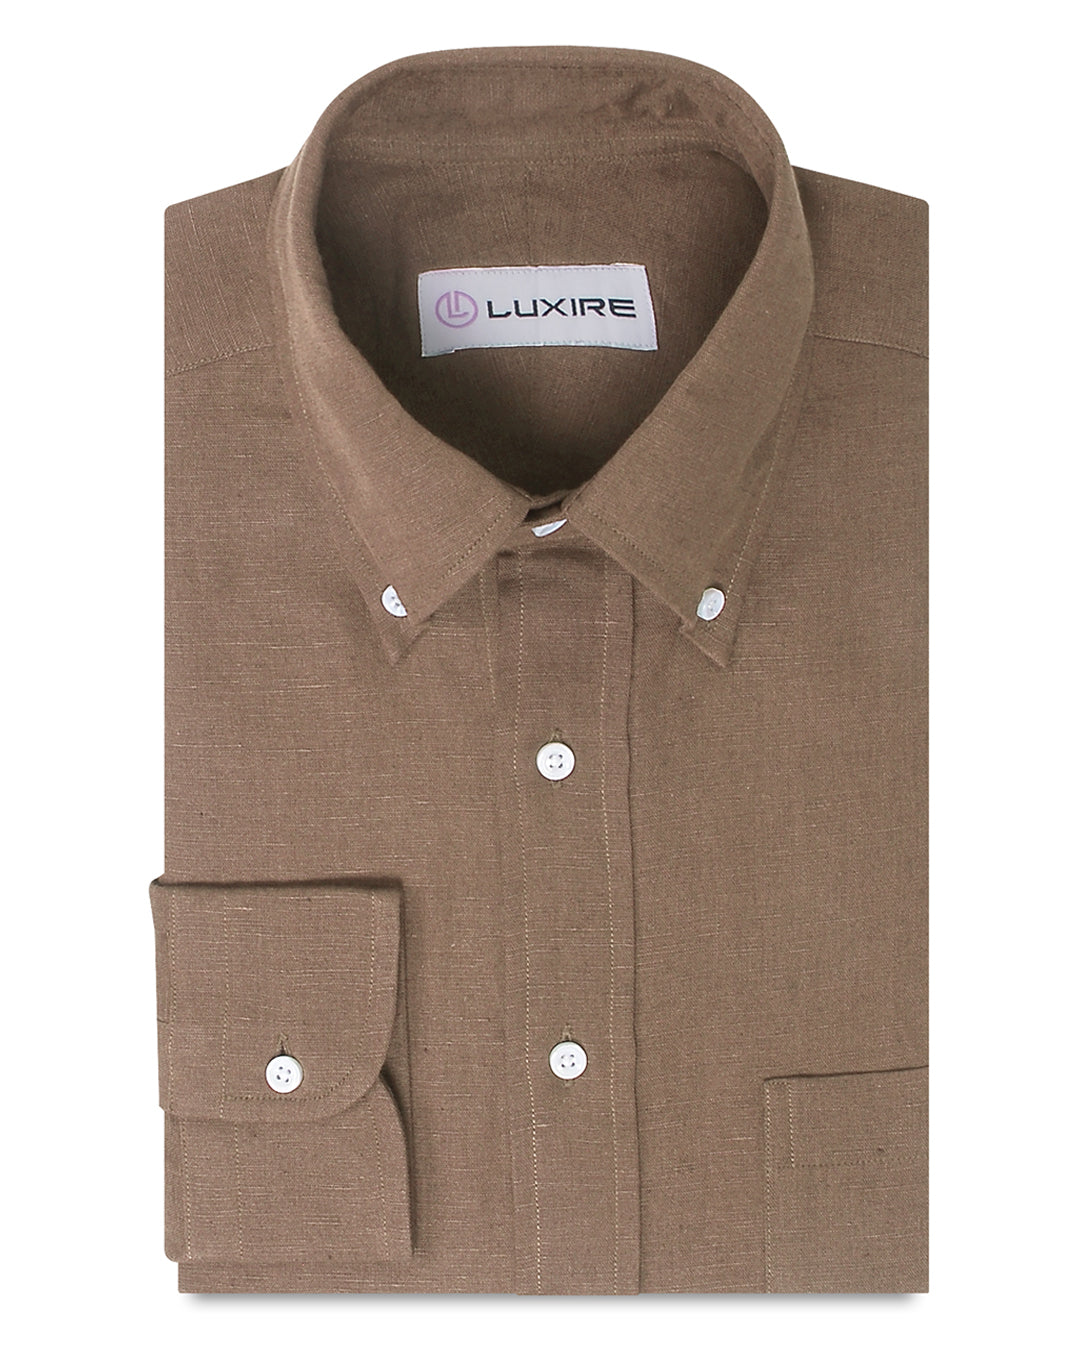 Front of the custom linen shirt for men in light brown by Luxire Clothing